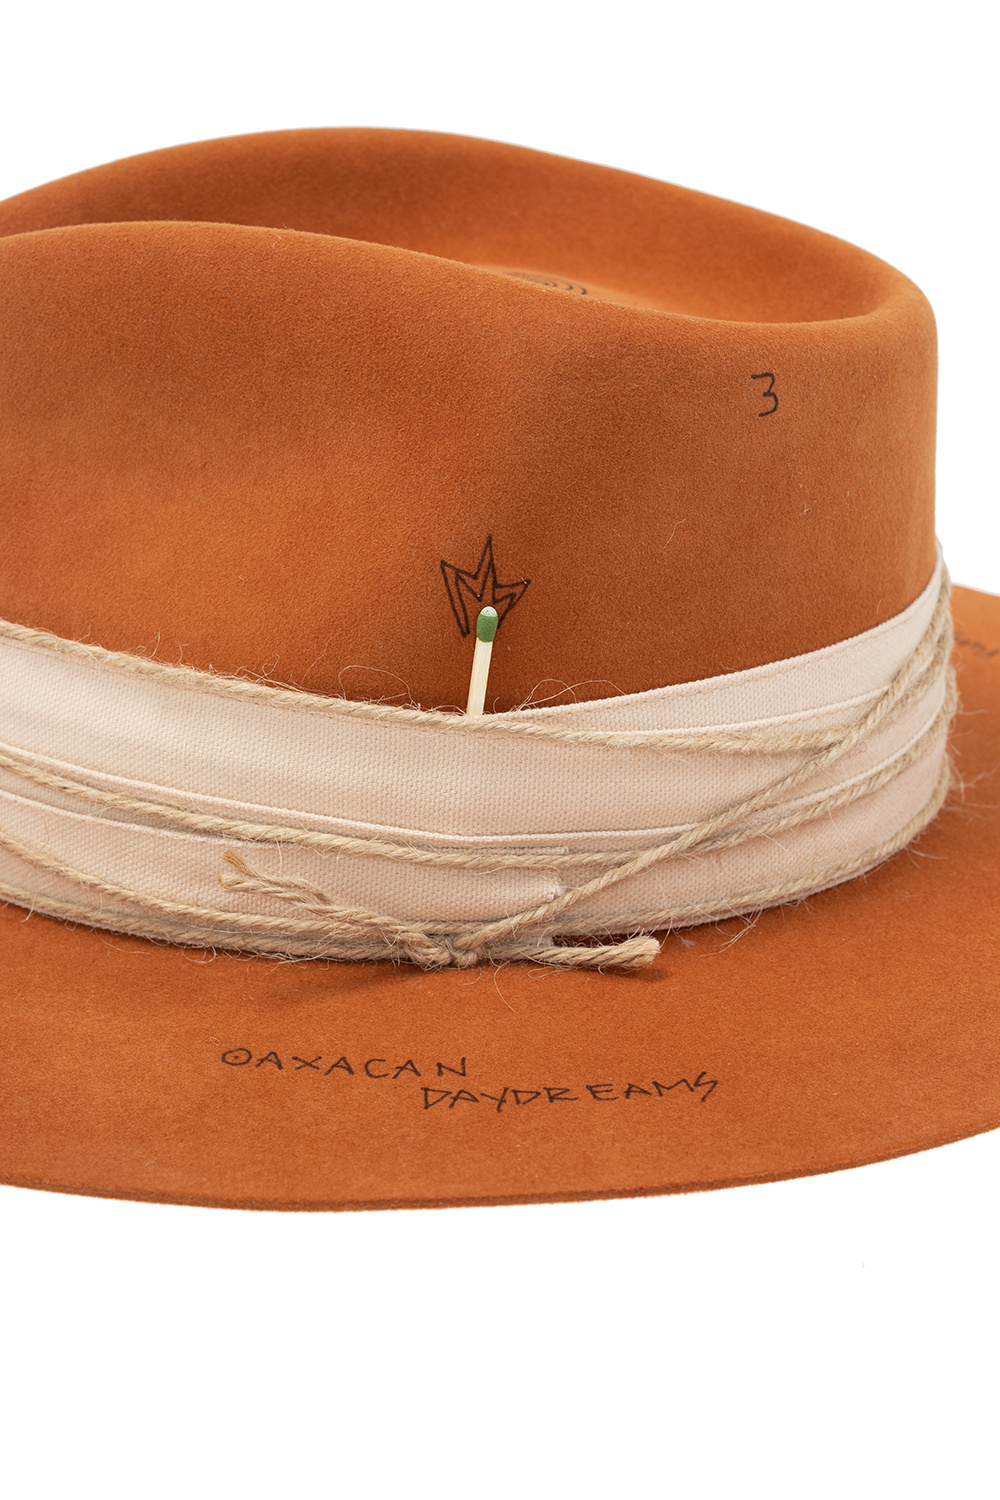 Nick Fouquet ‘Mexican Tattoo’ hat